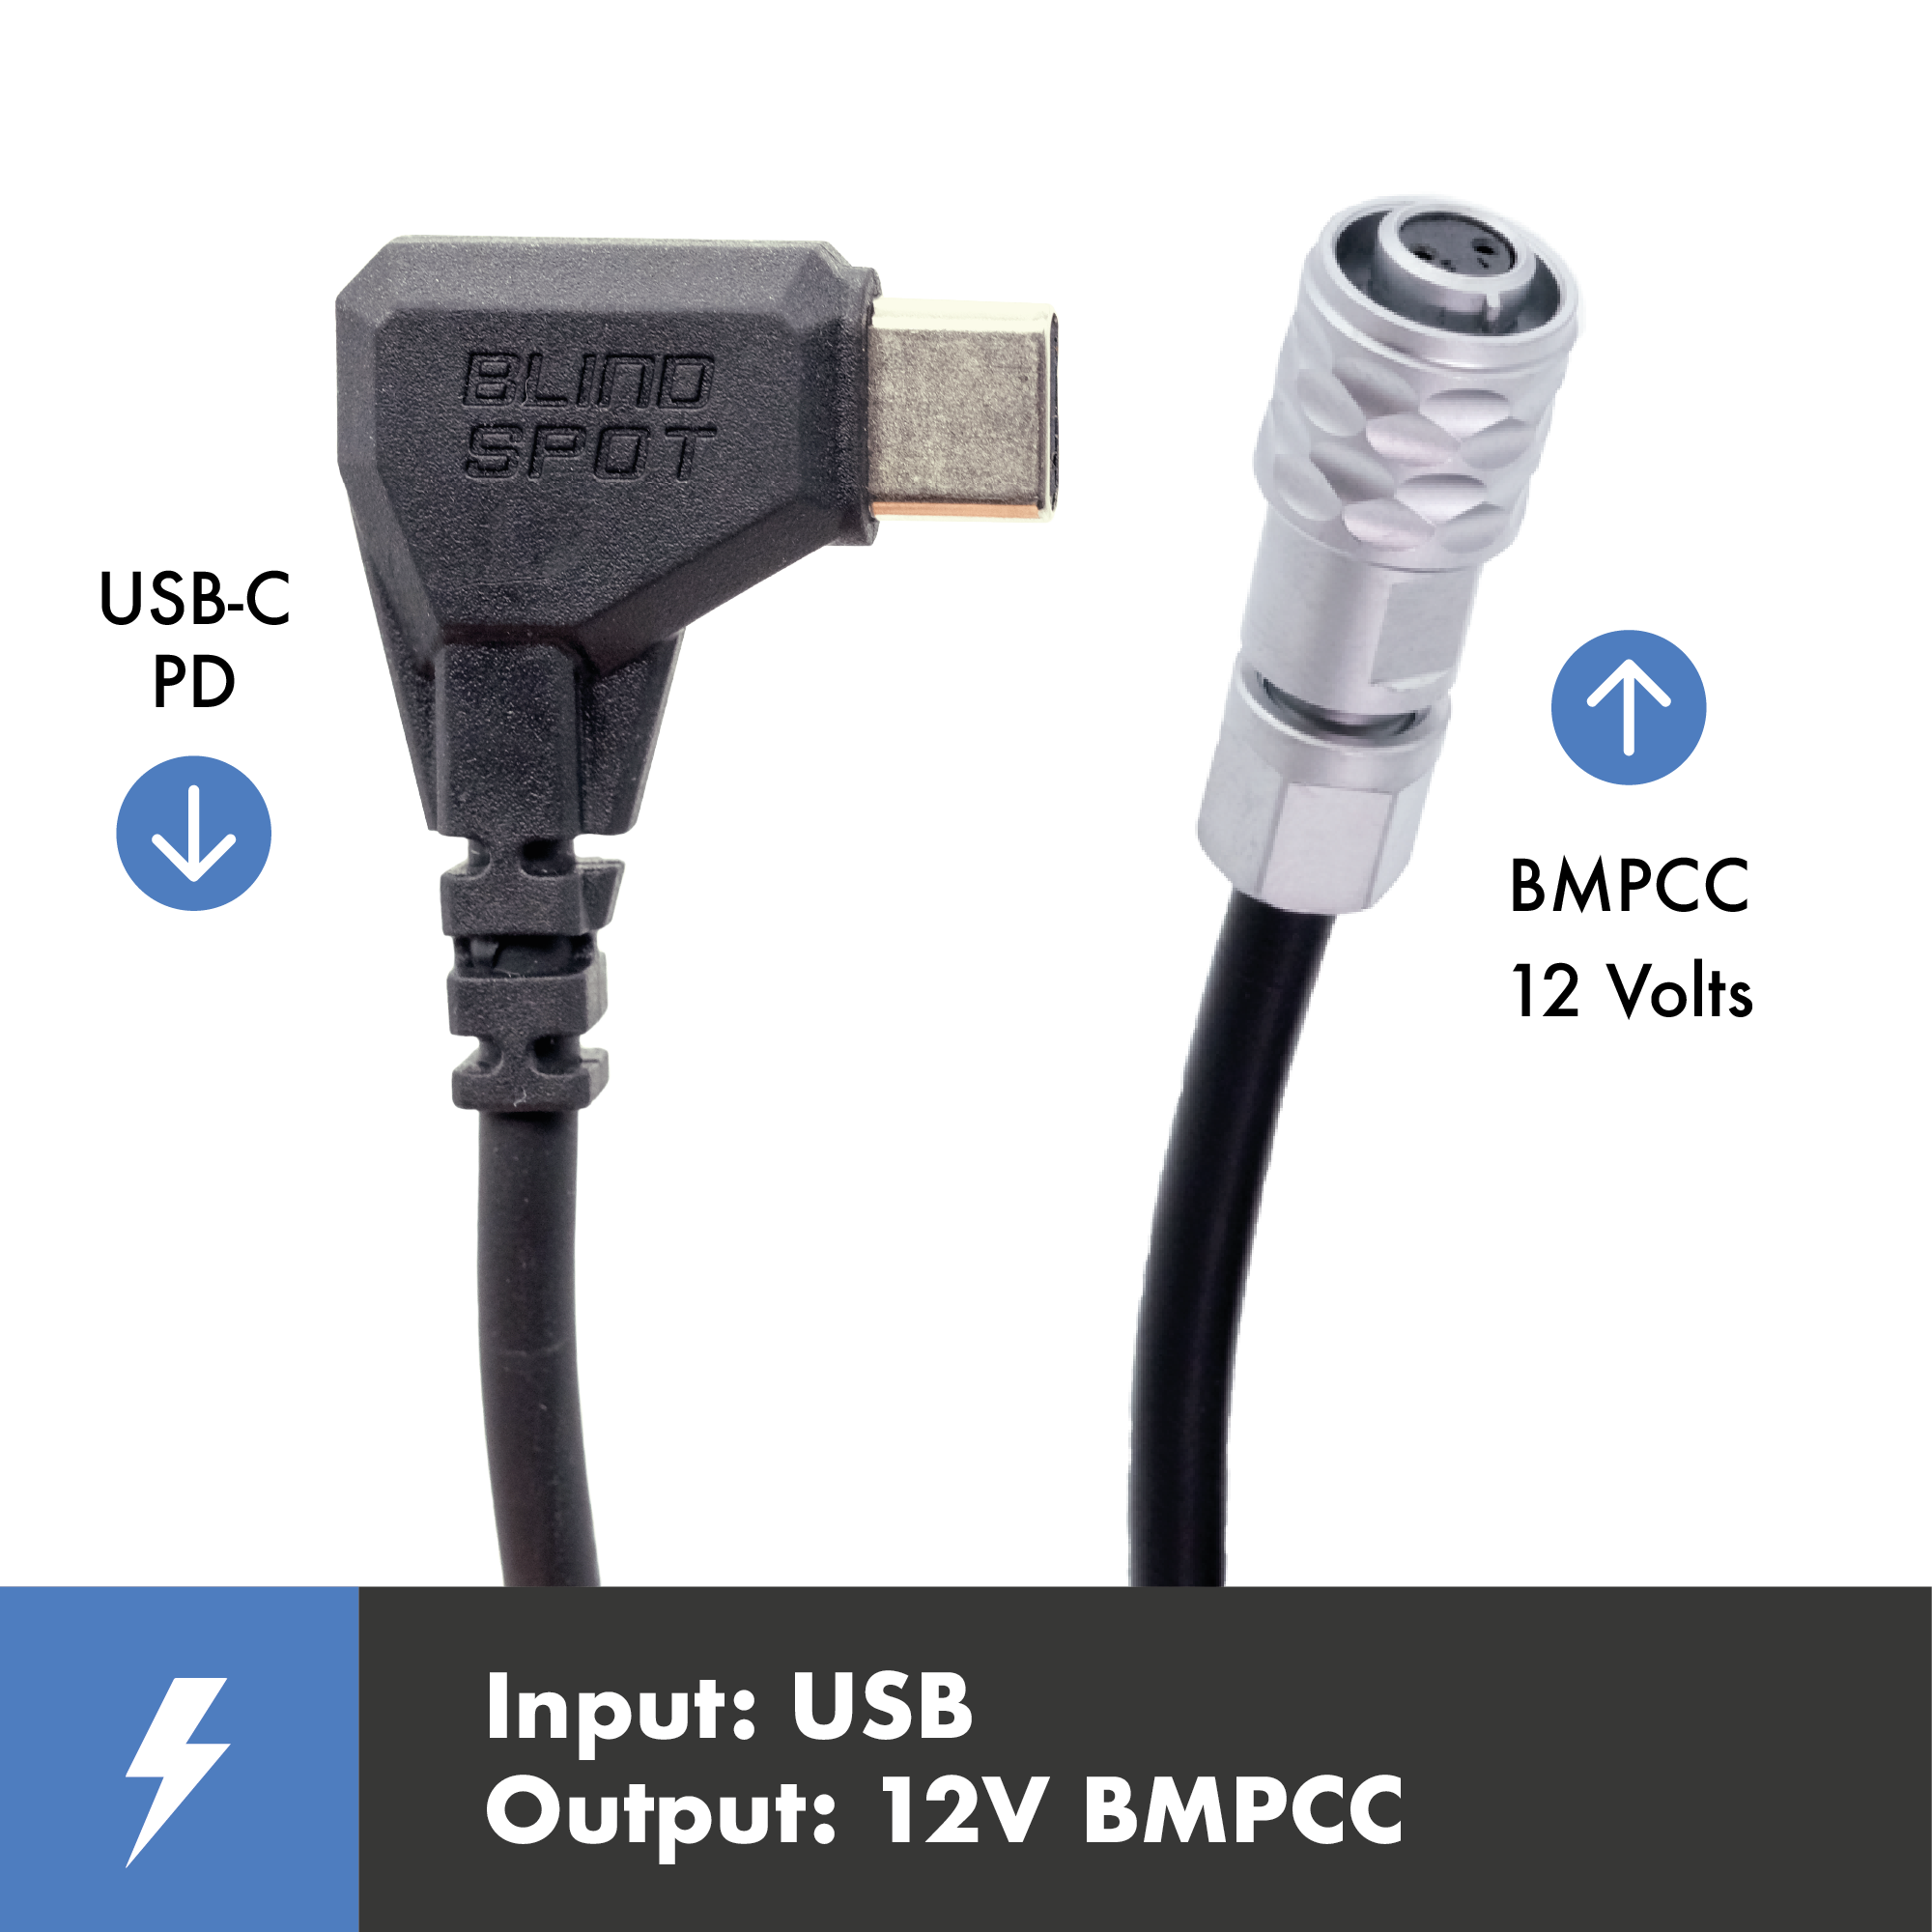 Blind SPOT - USB to 12V Adapter - 12 Volt DC Power Cable - Use Any